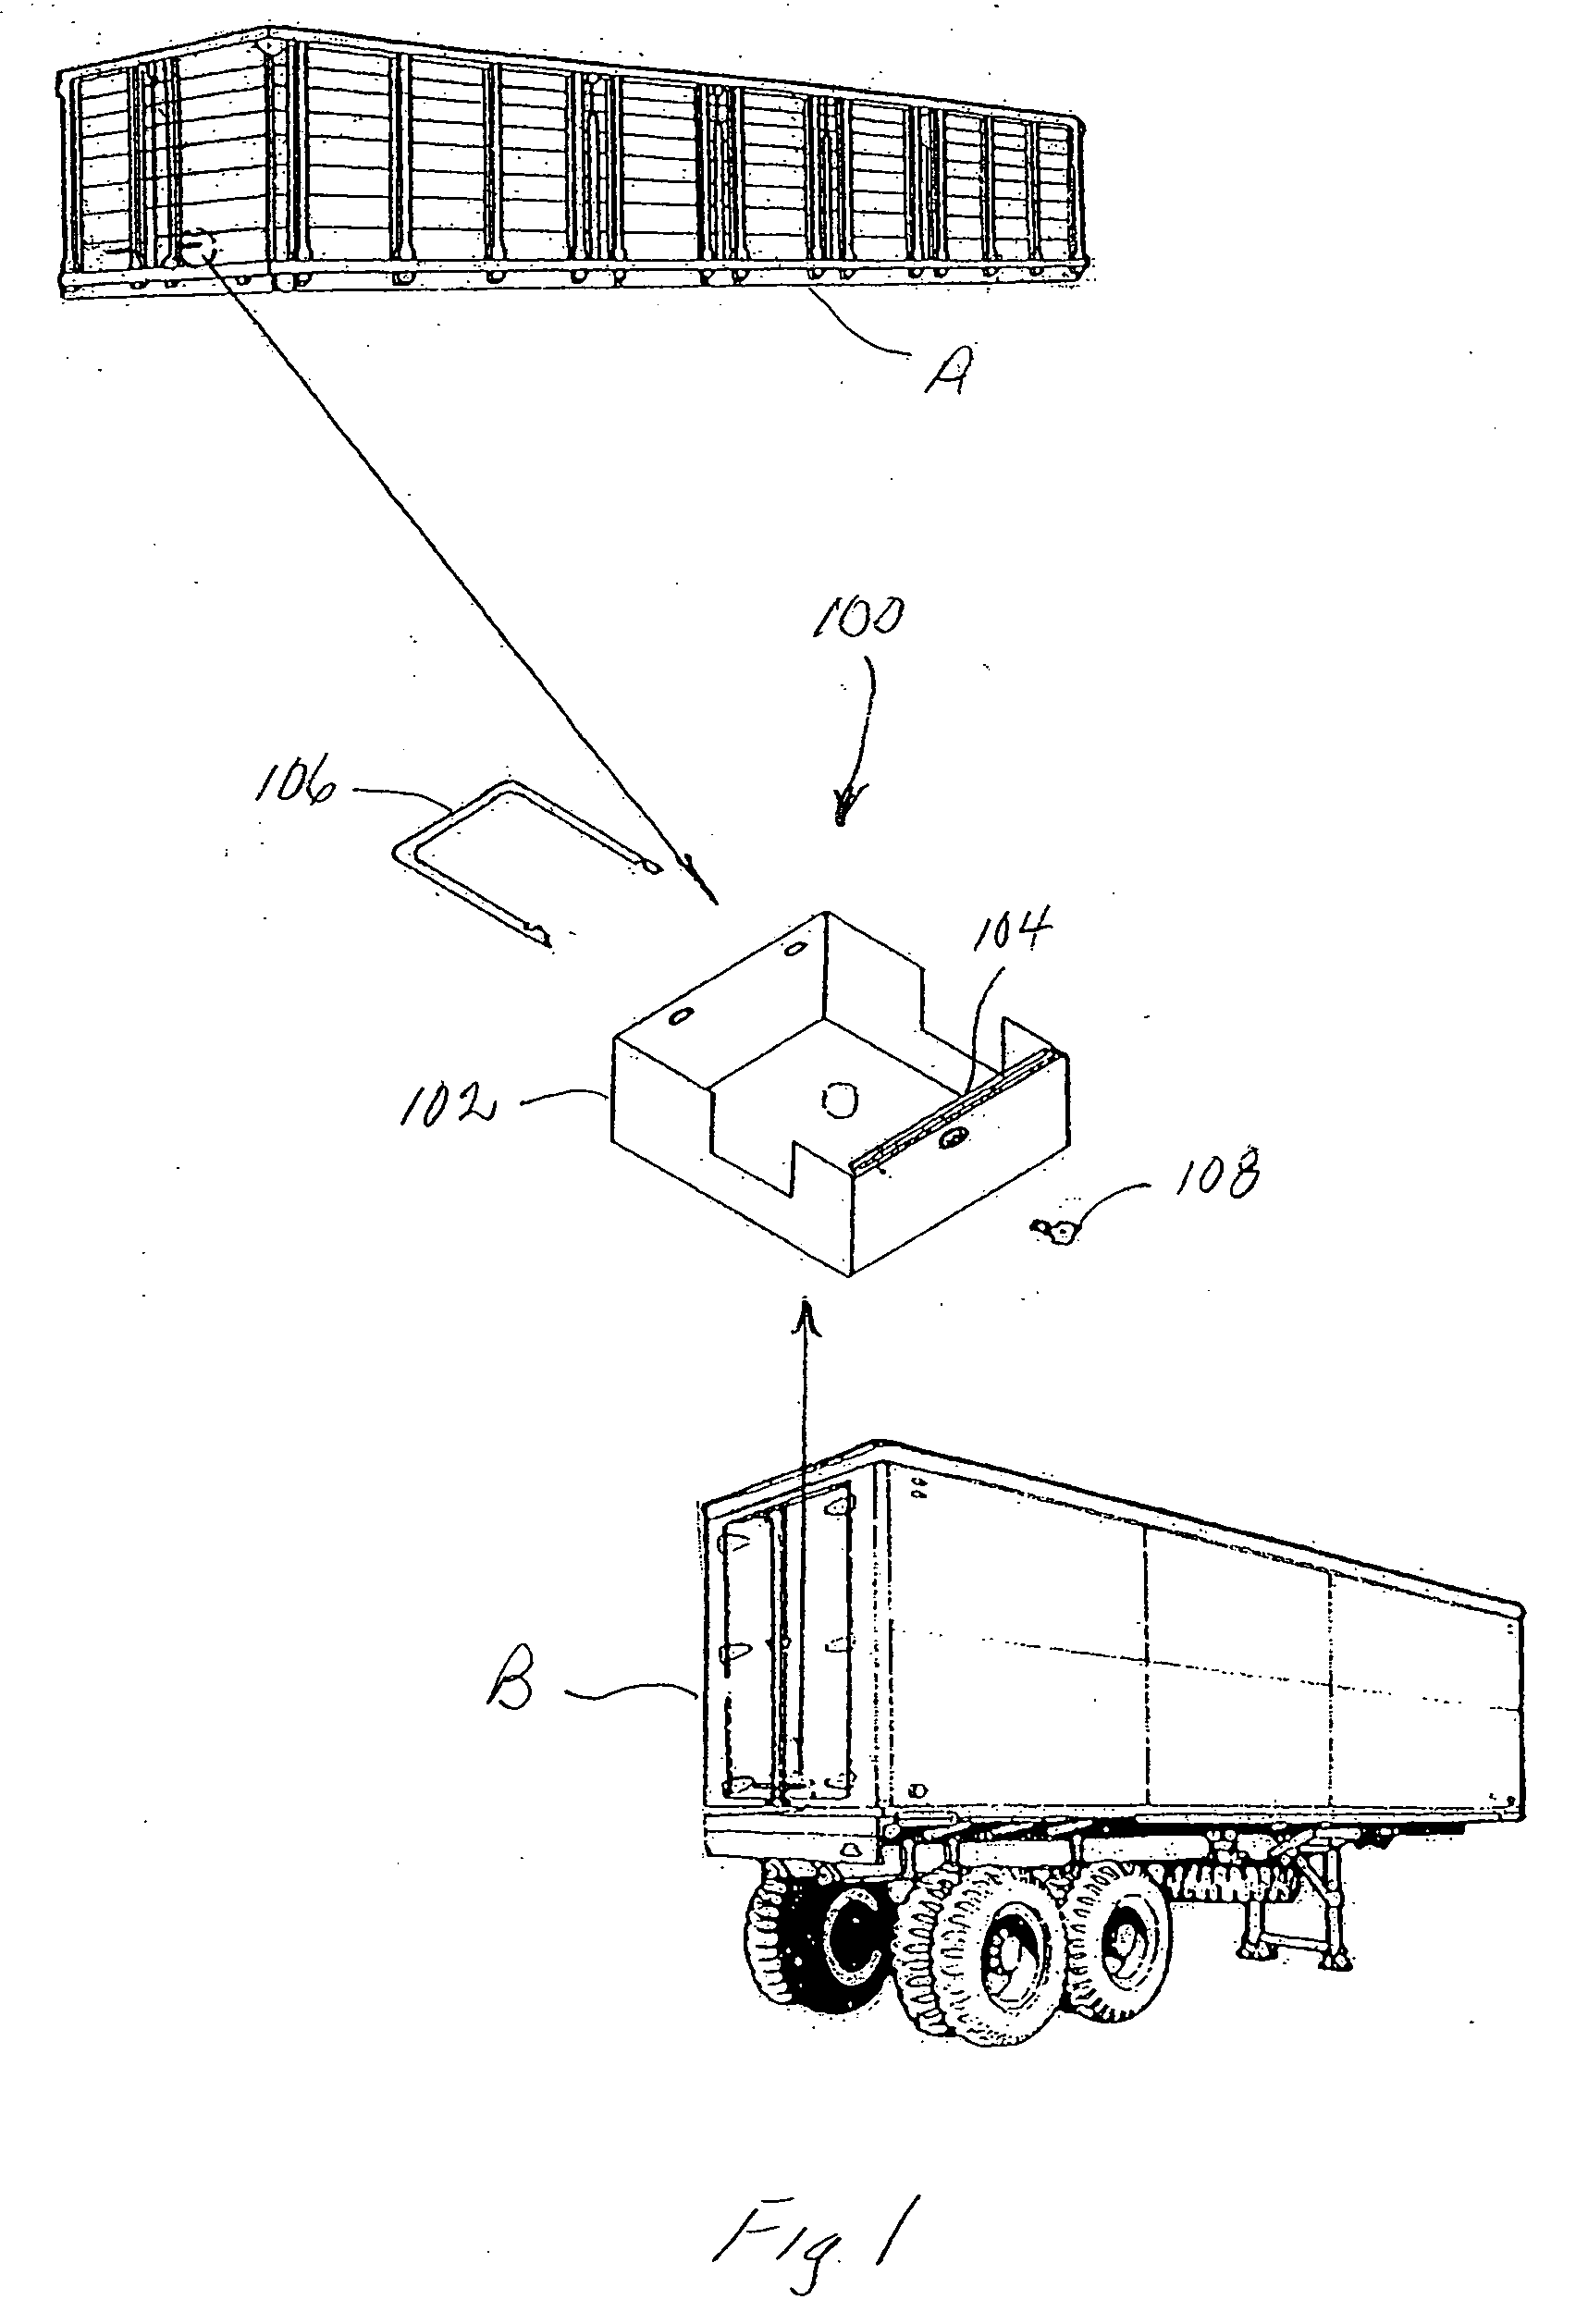 Locking device and method for securing cargo containers during transport and storage that permits secure inspection of any authority seal